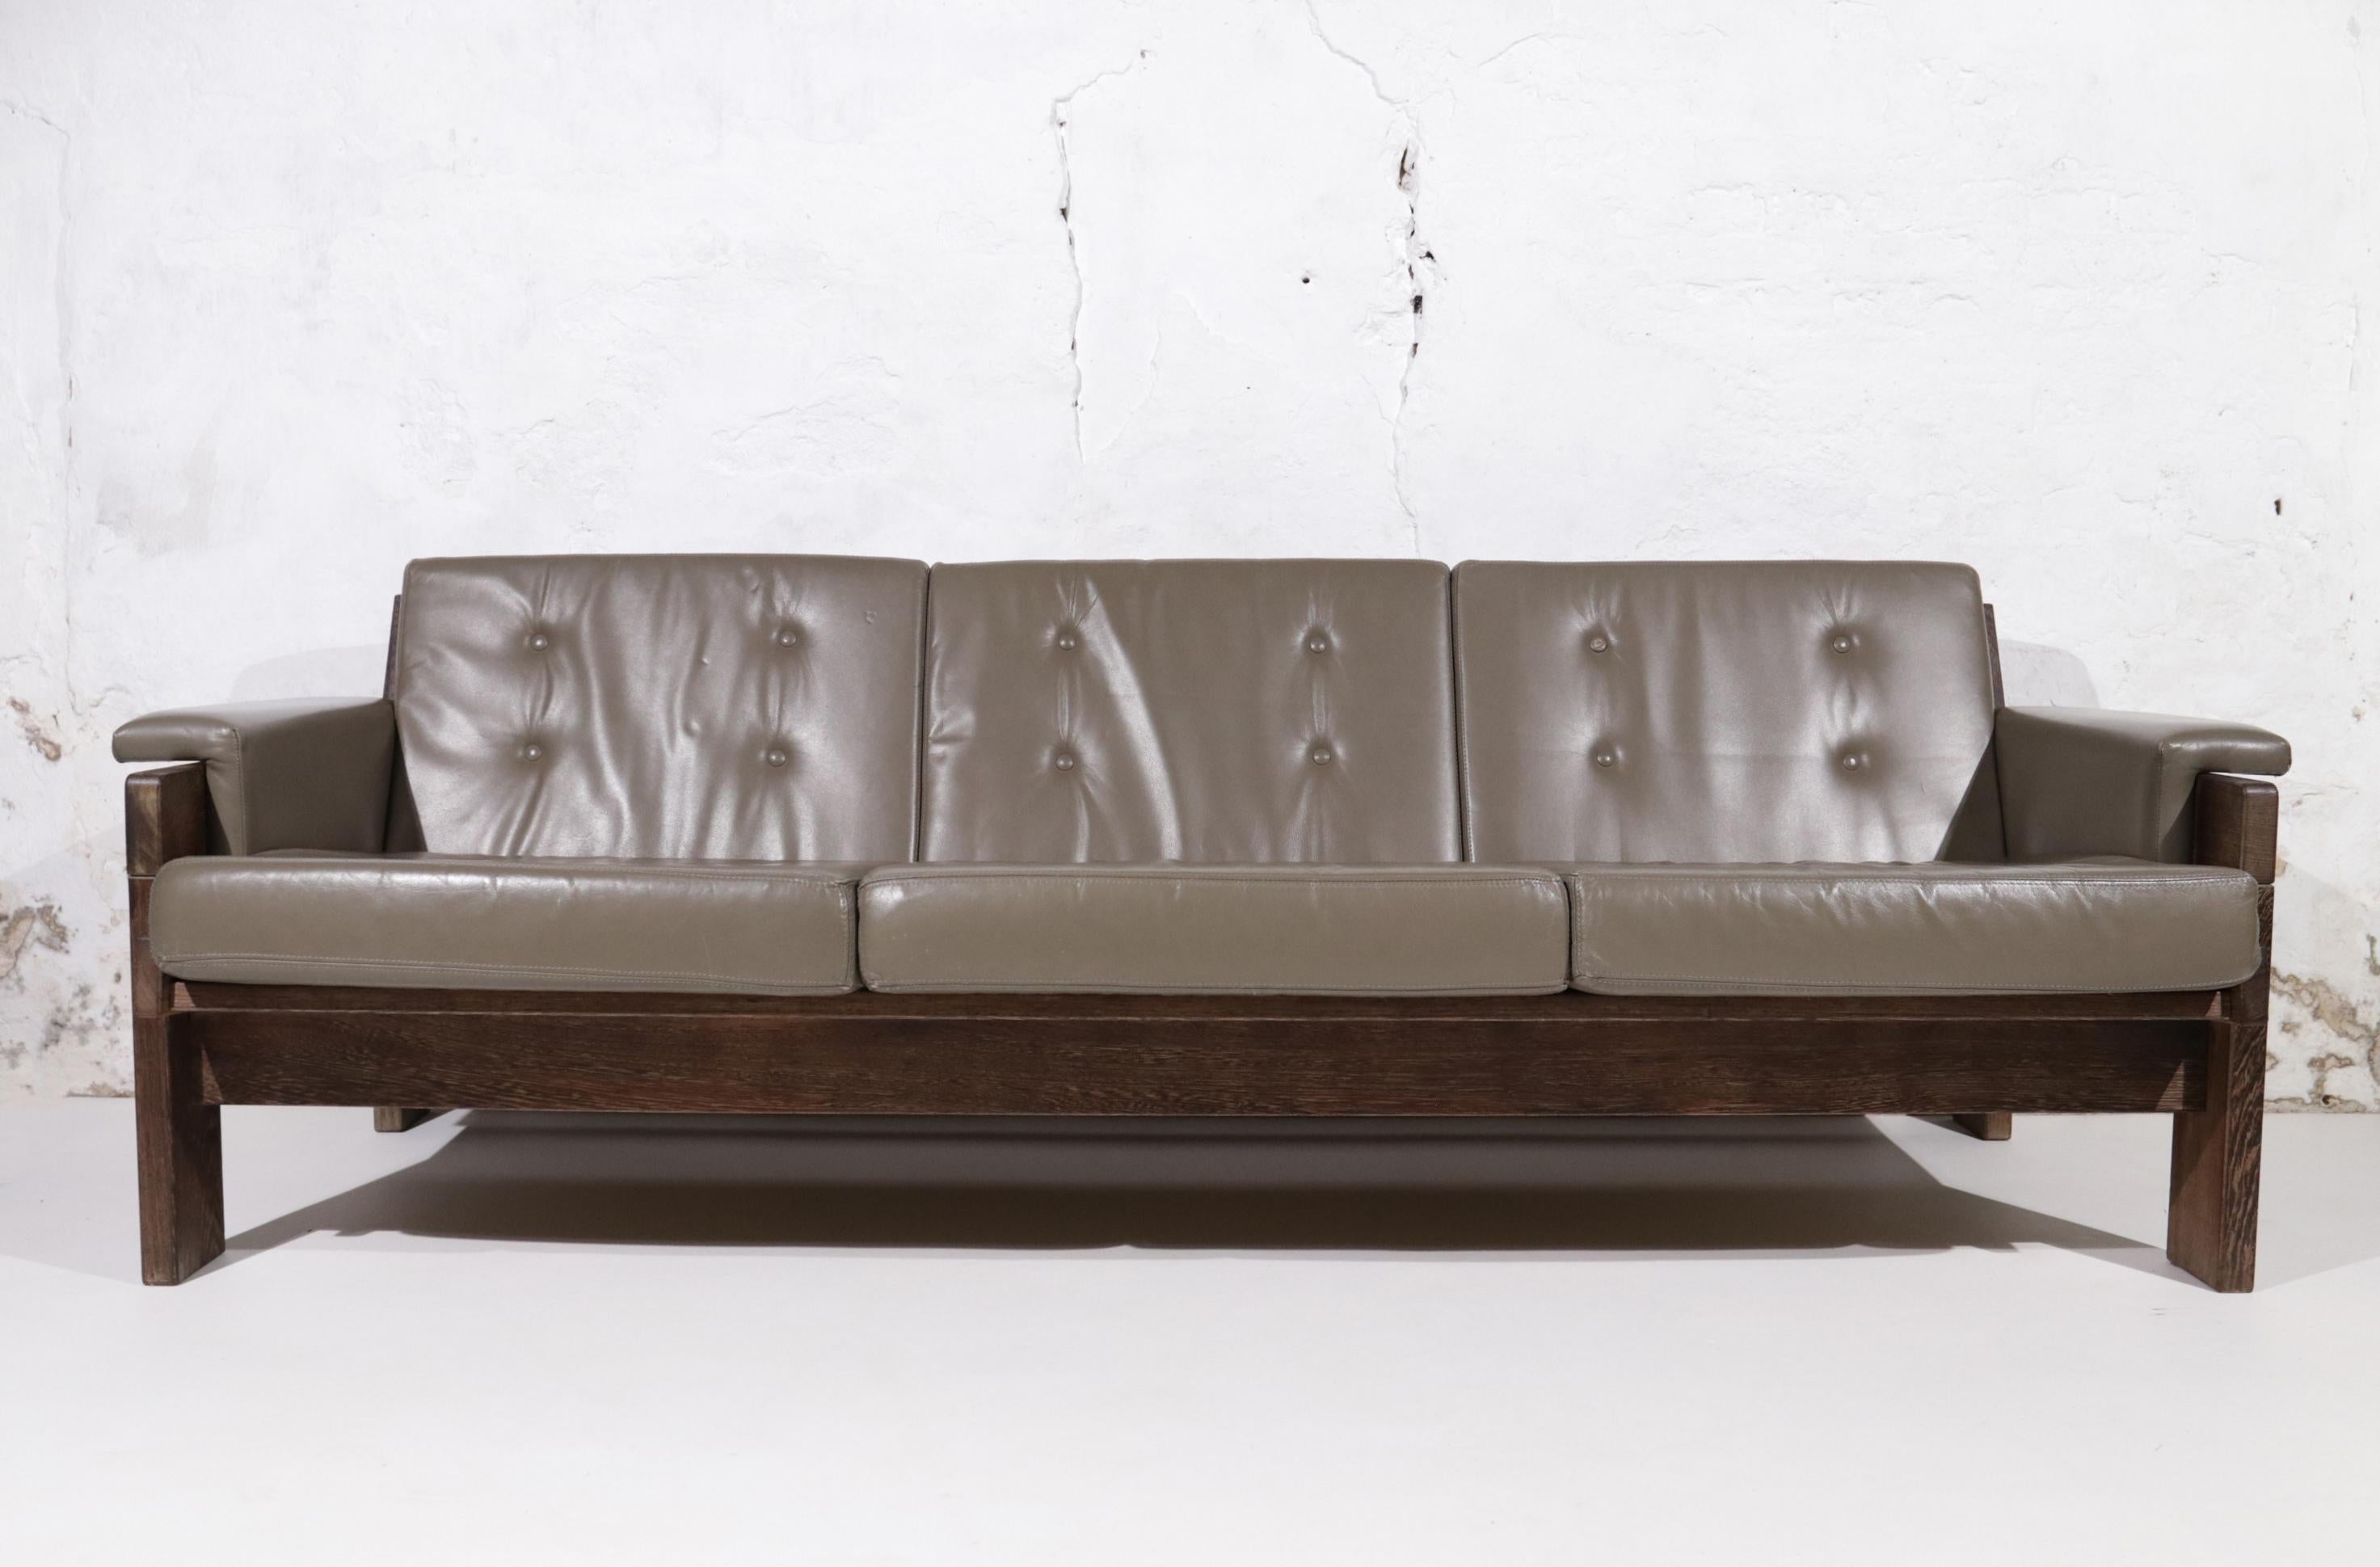 Very nice sofa designed by the Dutch designer Martin Visser in the 1970s.
The frame is made of solid Wenge wood and the cushions are made of leather.